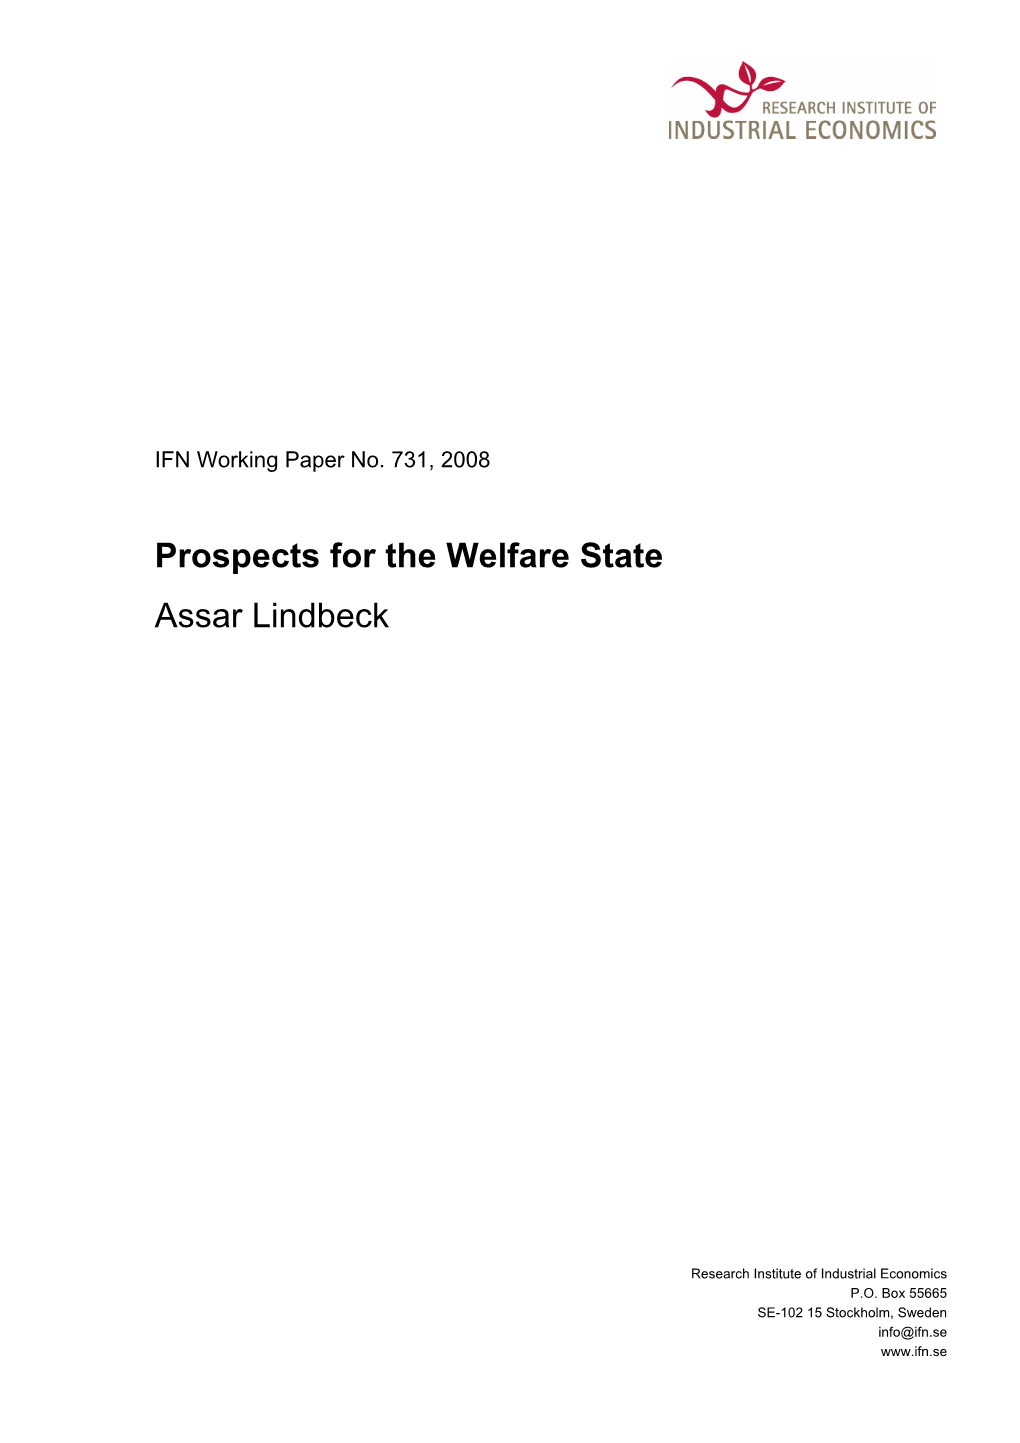 Prospects for the Welfare State Assar Lindbeck